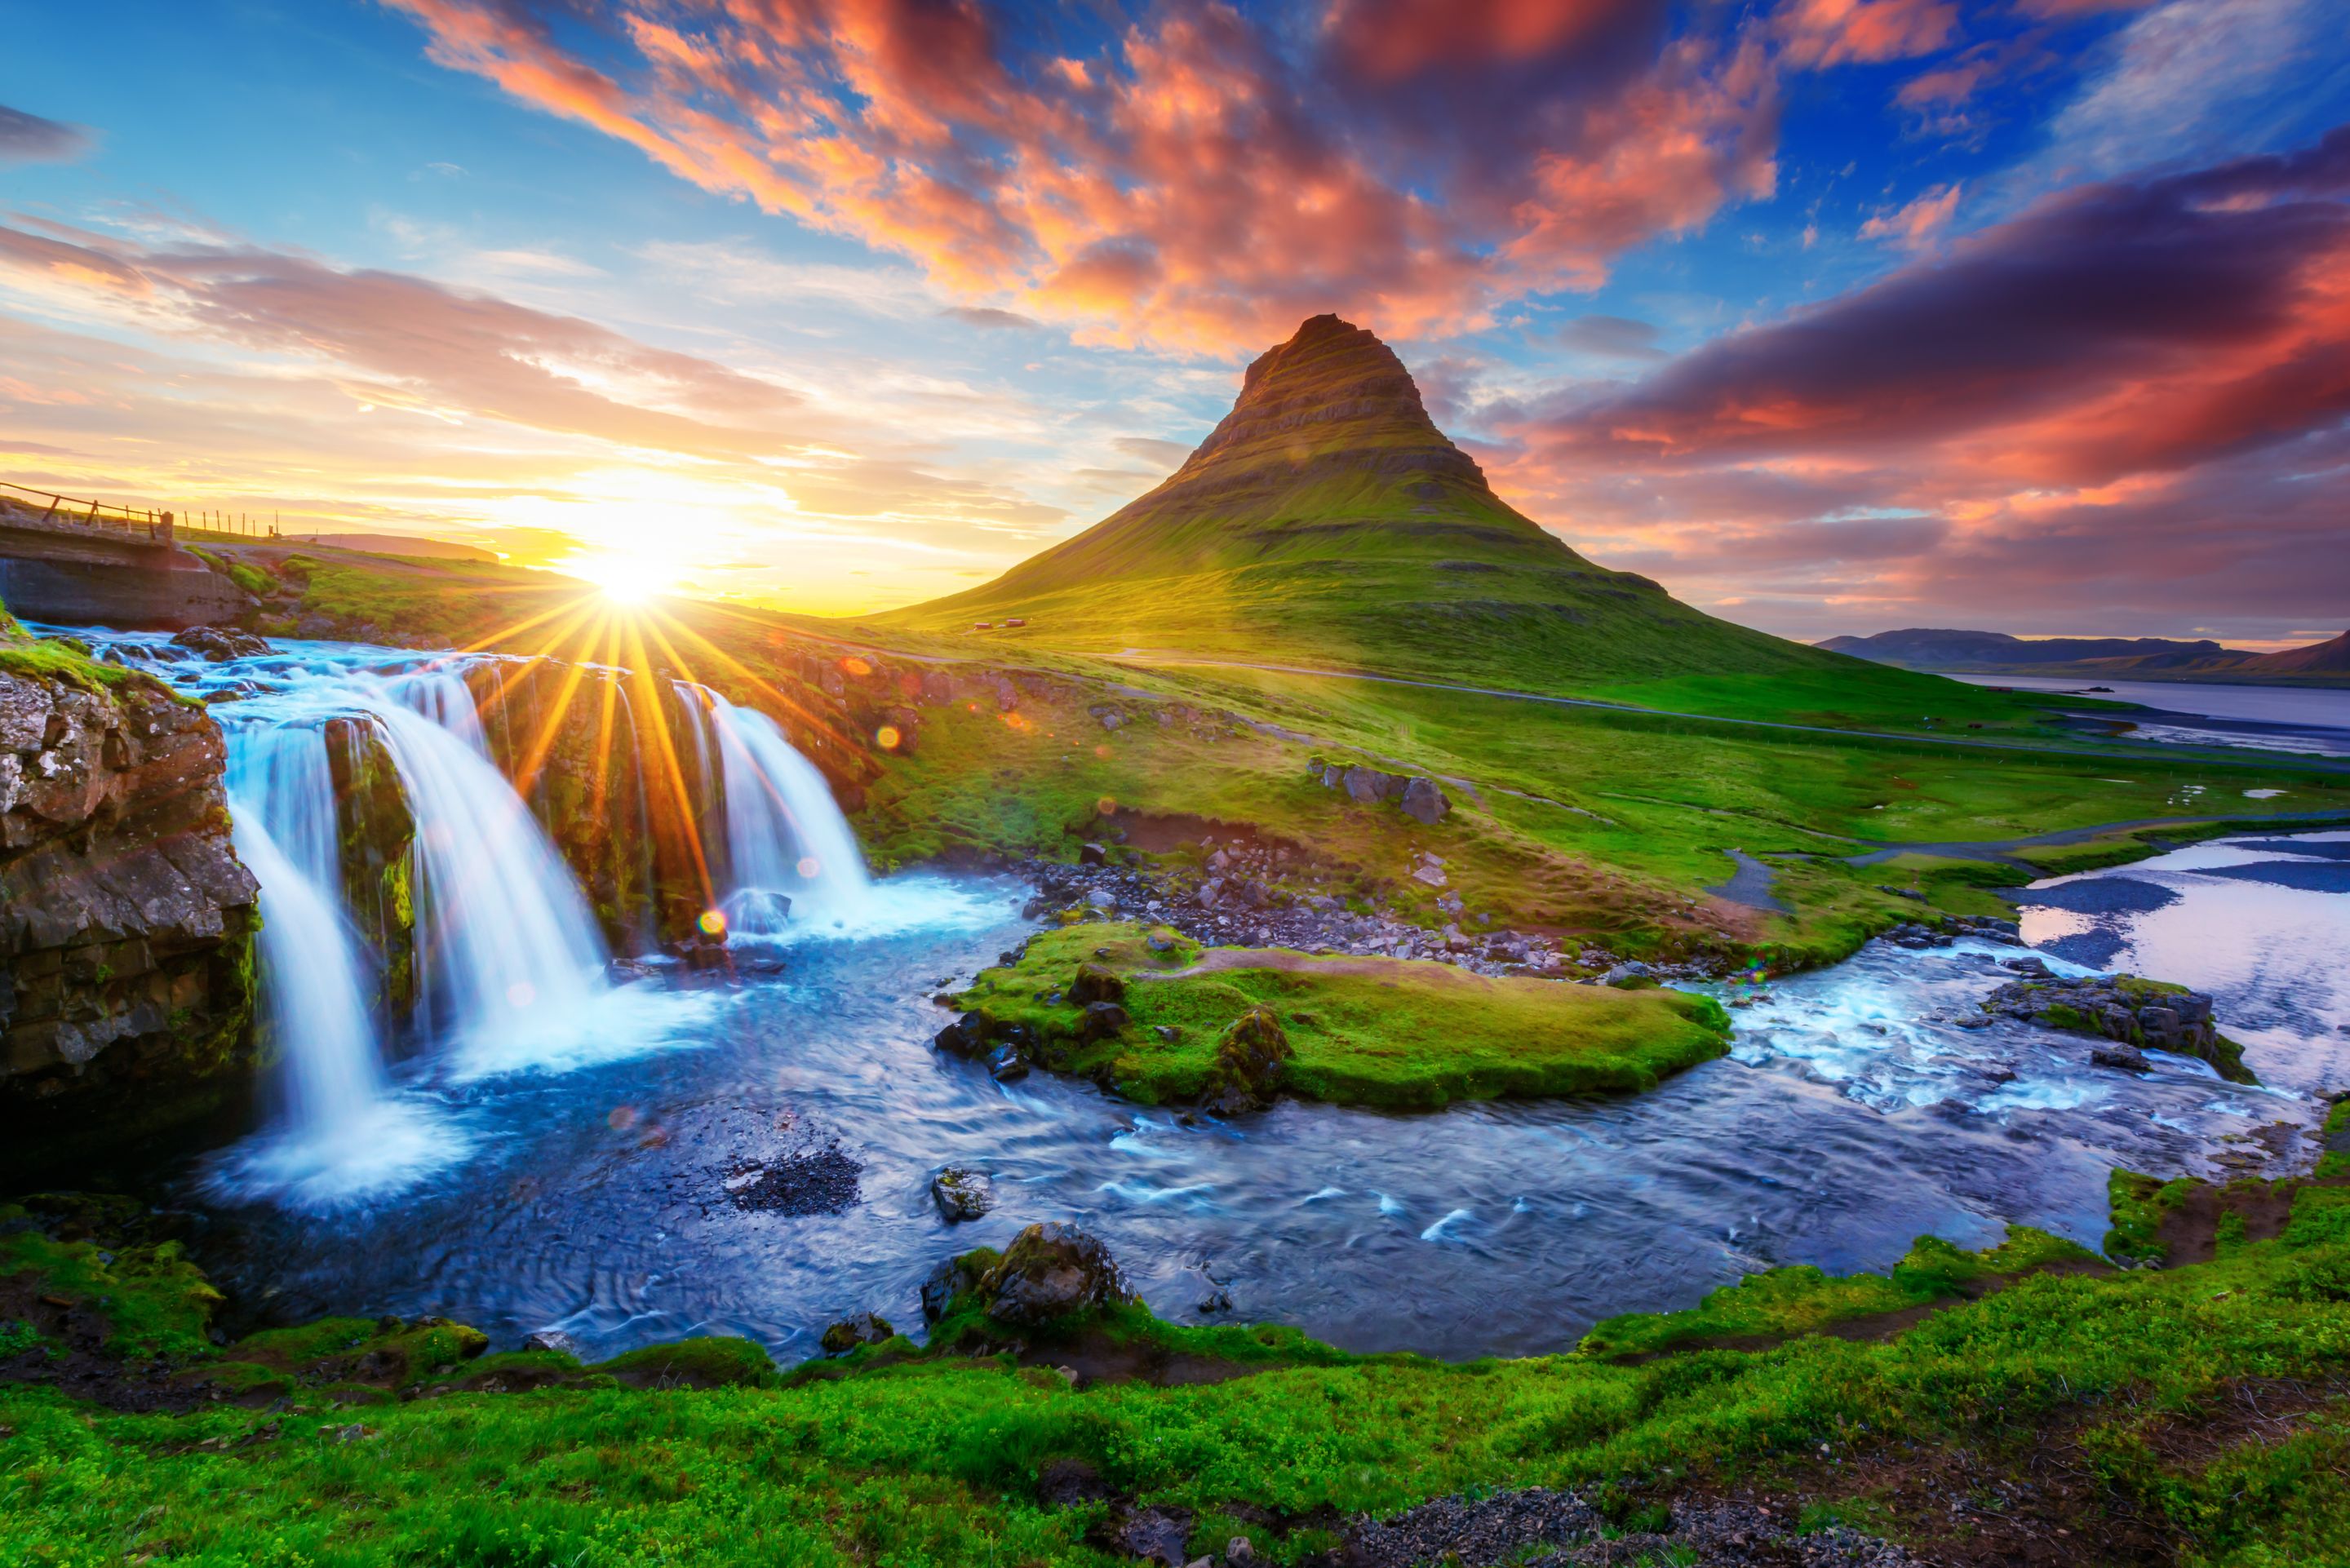 Green Mountain in Iceland with a sunset in the background and a waterfall in the front